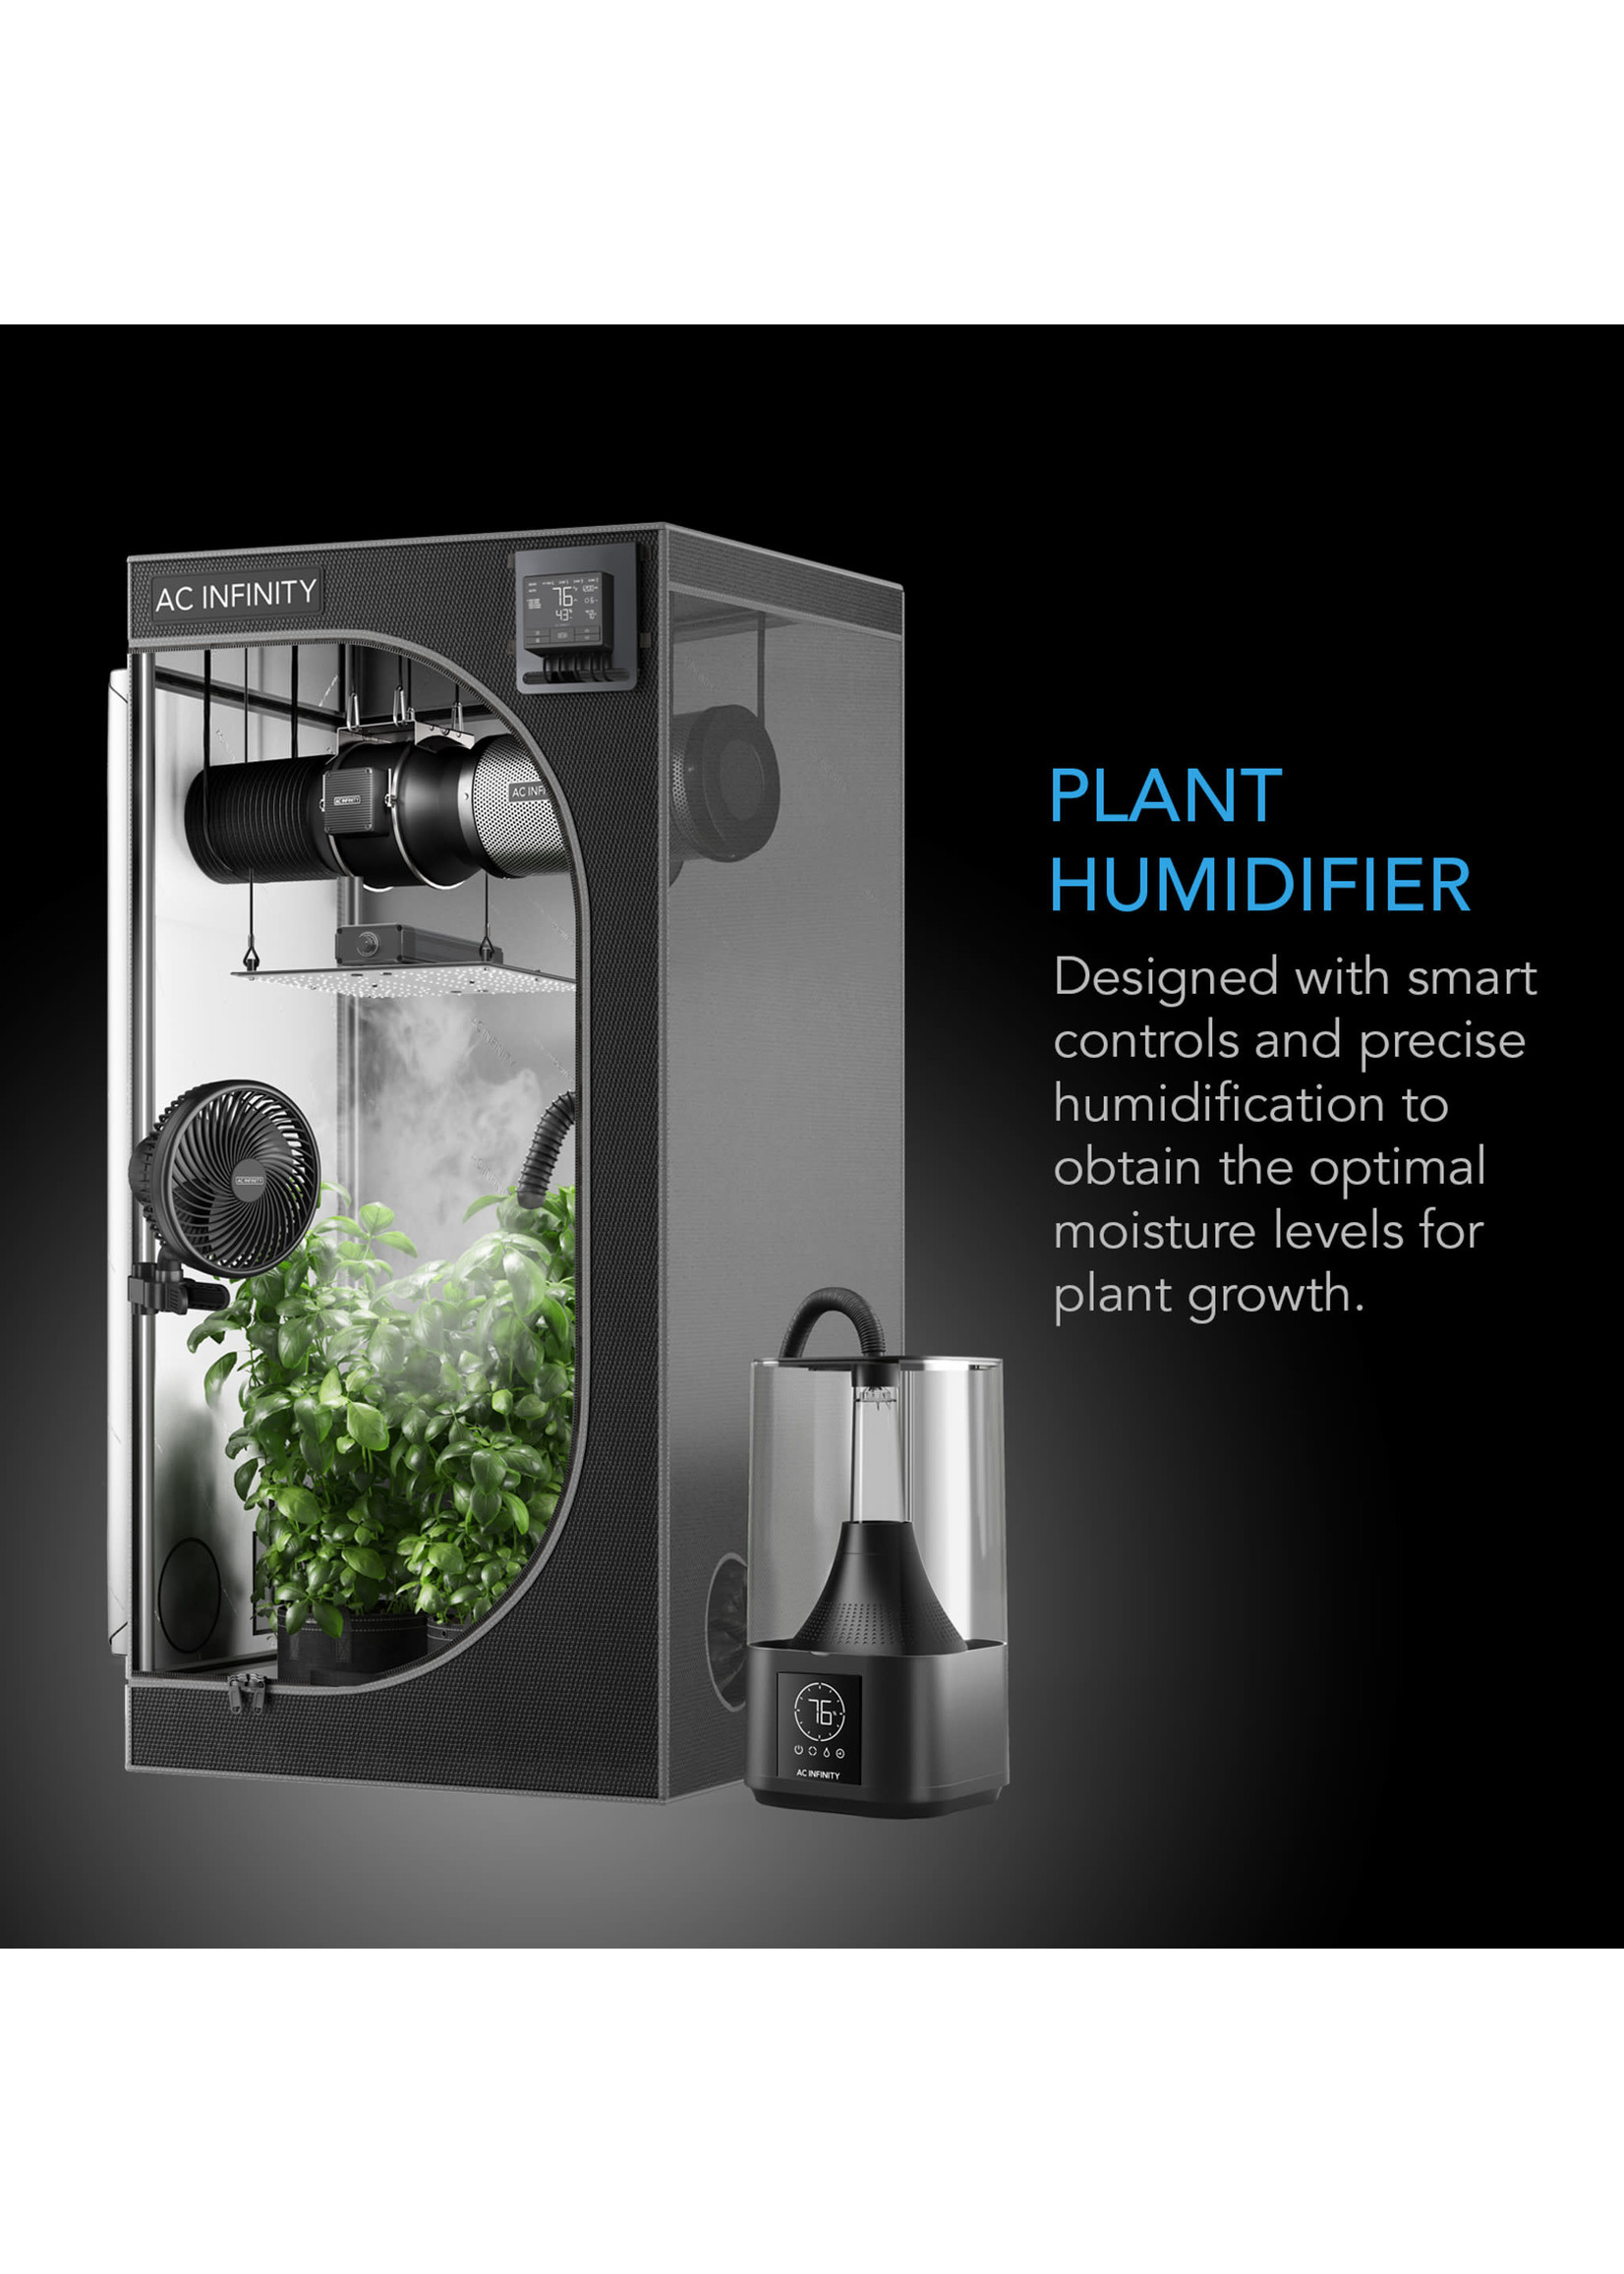 AC Infinity CLOUDFORGE T3, ENVIRONMENTAL PLANT HUMIDIFIER, 4.5L, SMART CONTROLS, TARGETED VAPORIZING